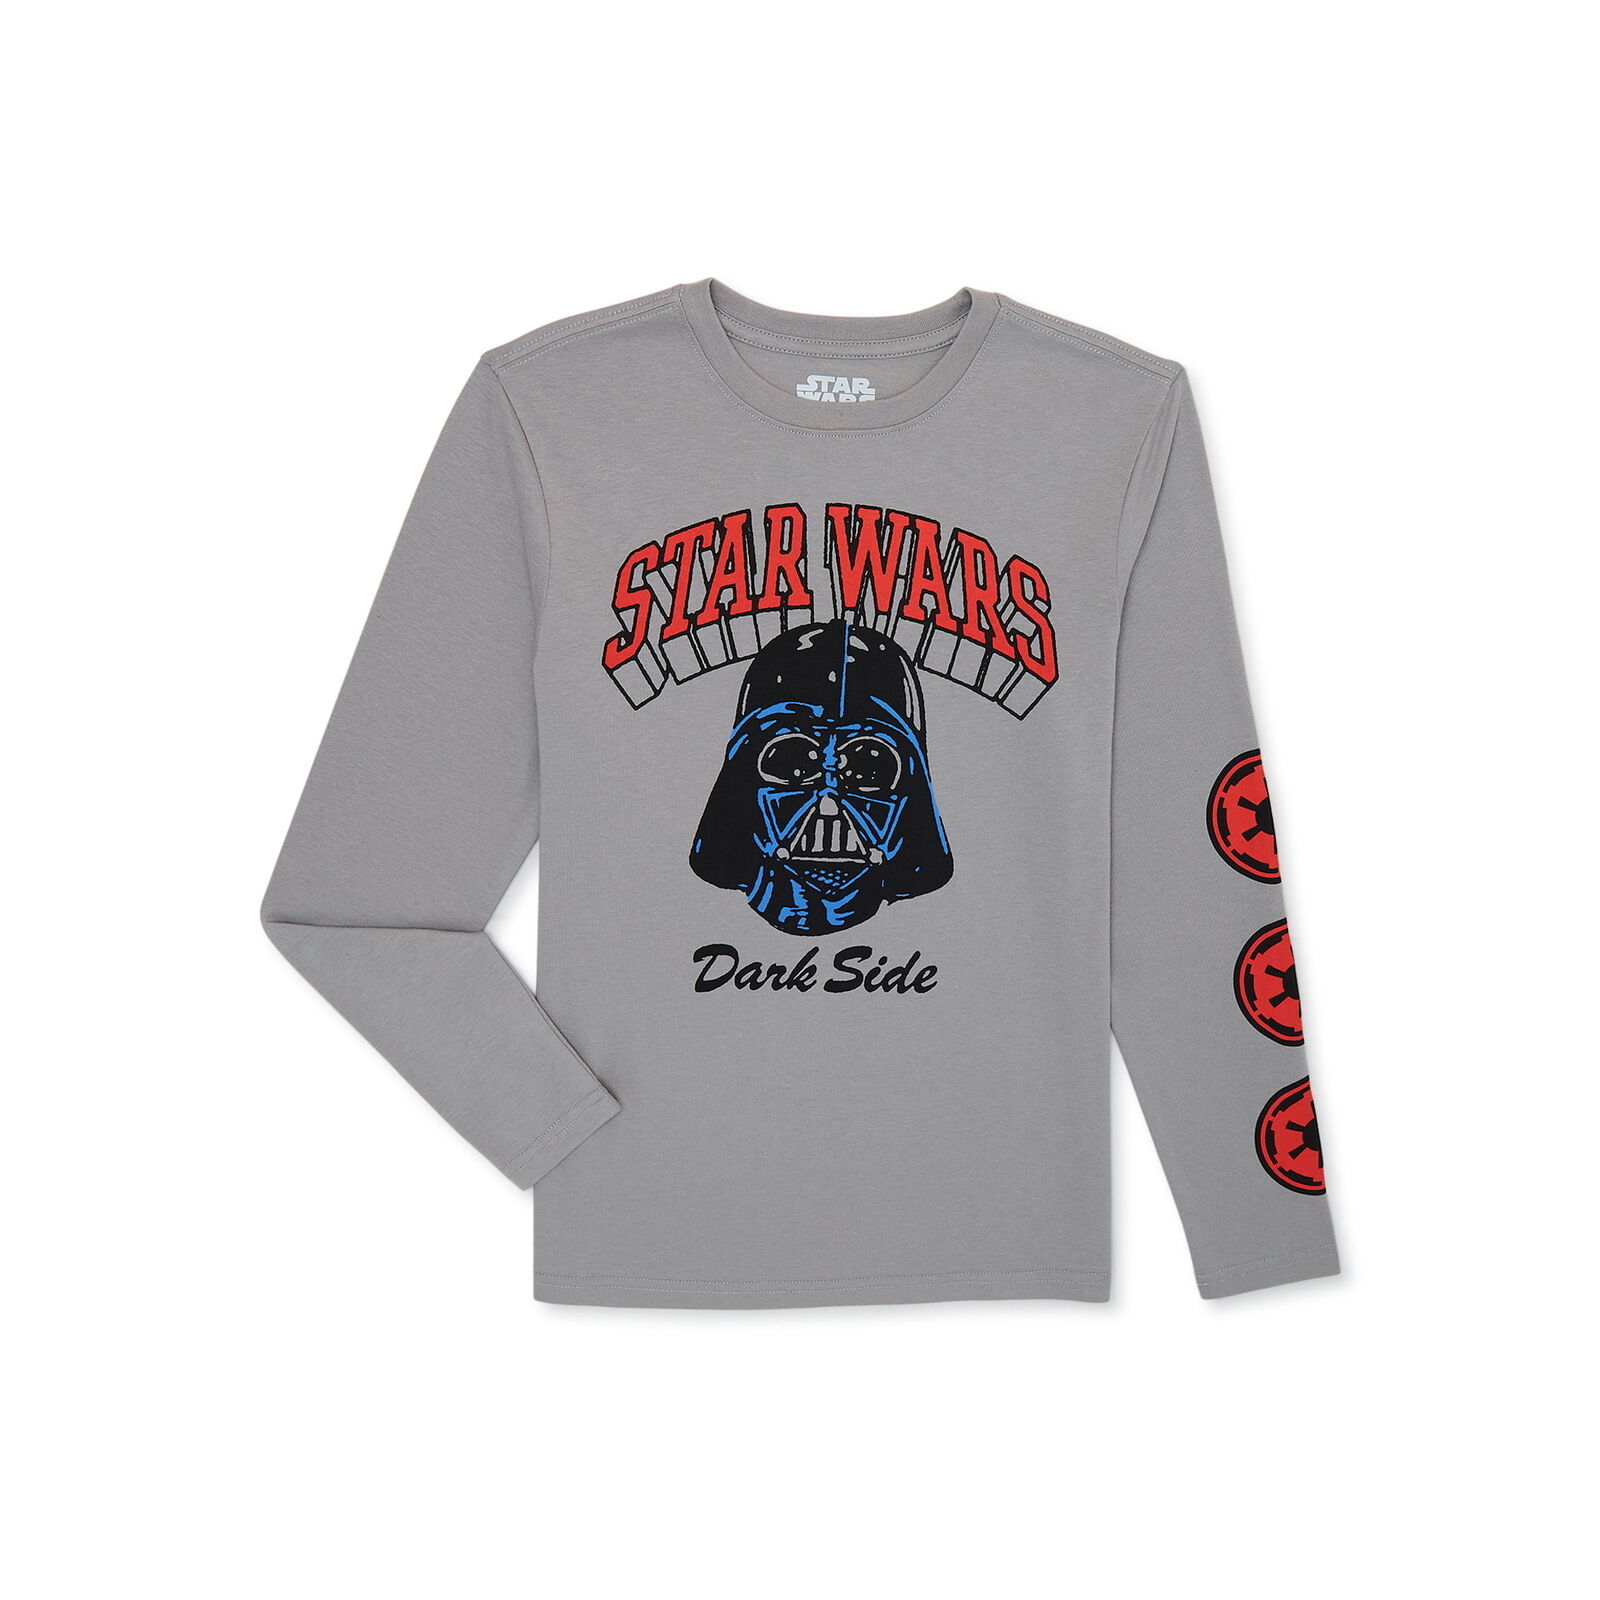 Primary image for Star Wars Boys Long Sleeve Darth Vader Graphic T-Shirt Size S (6-7) Color Silver